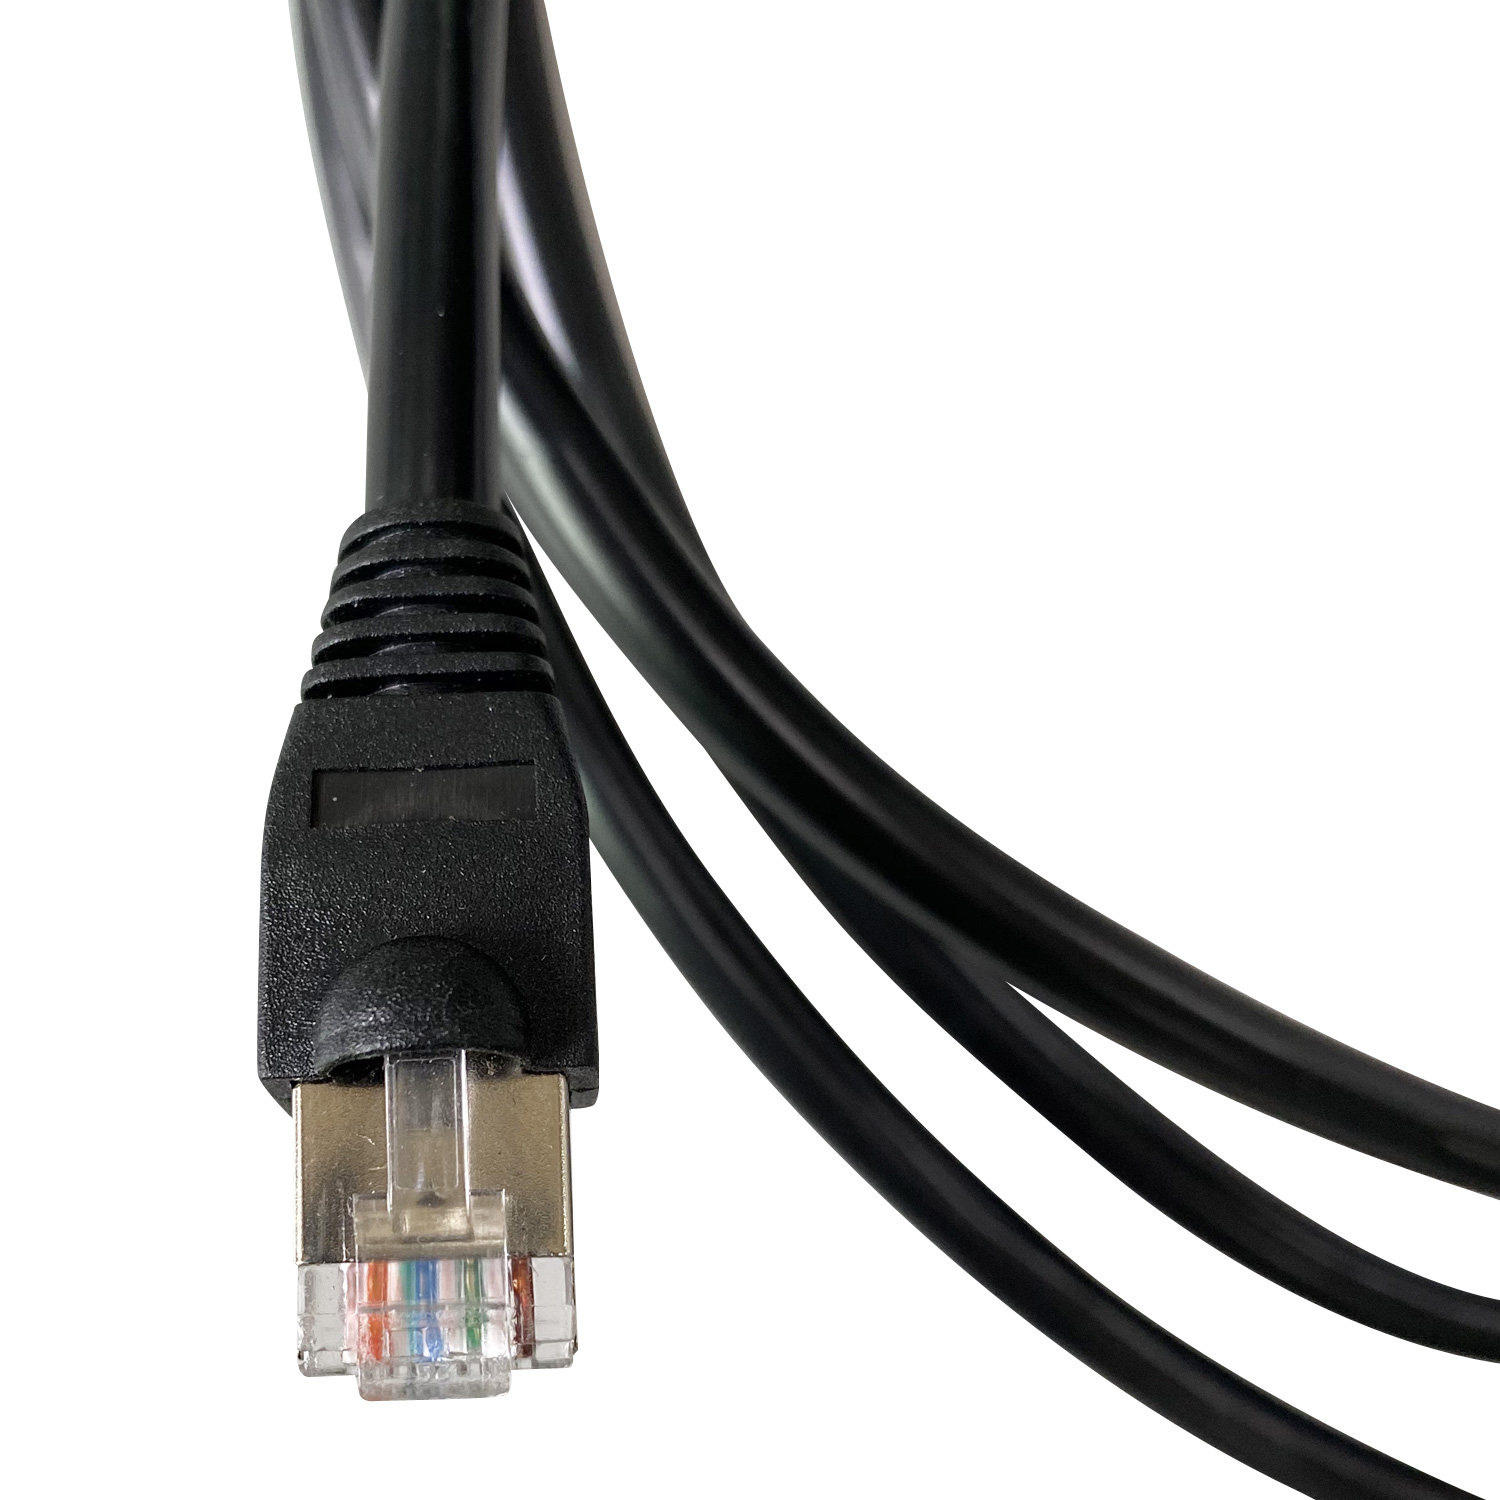 CAT5e UTP FTP Communication Cable Patch Cord for Networking 